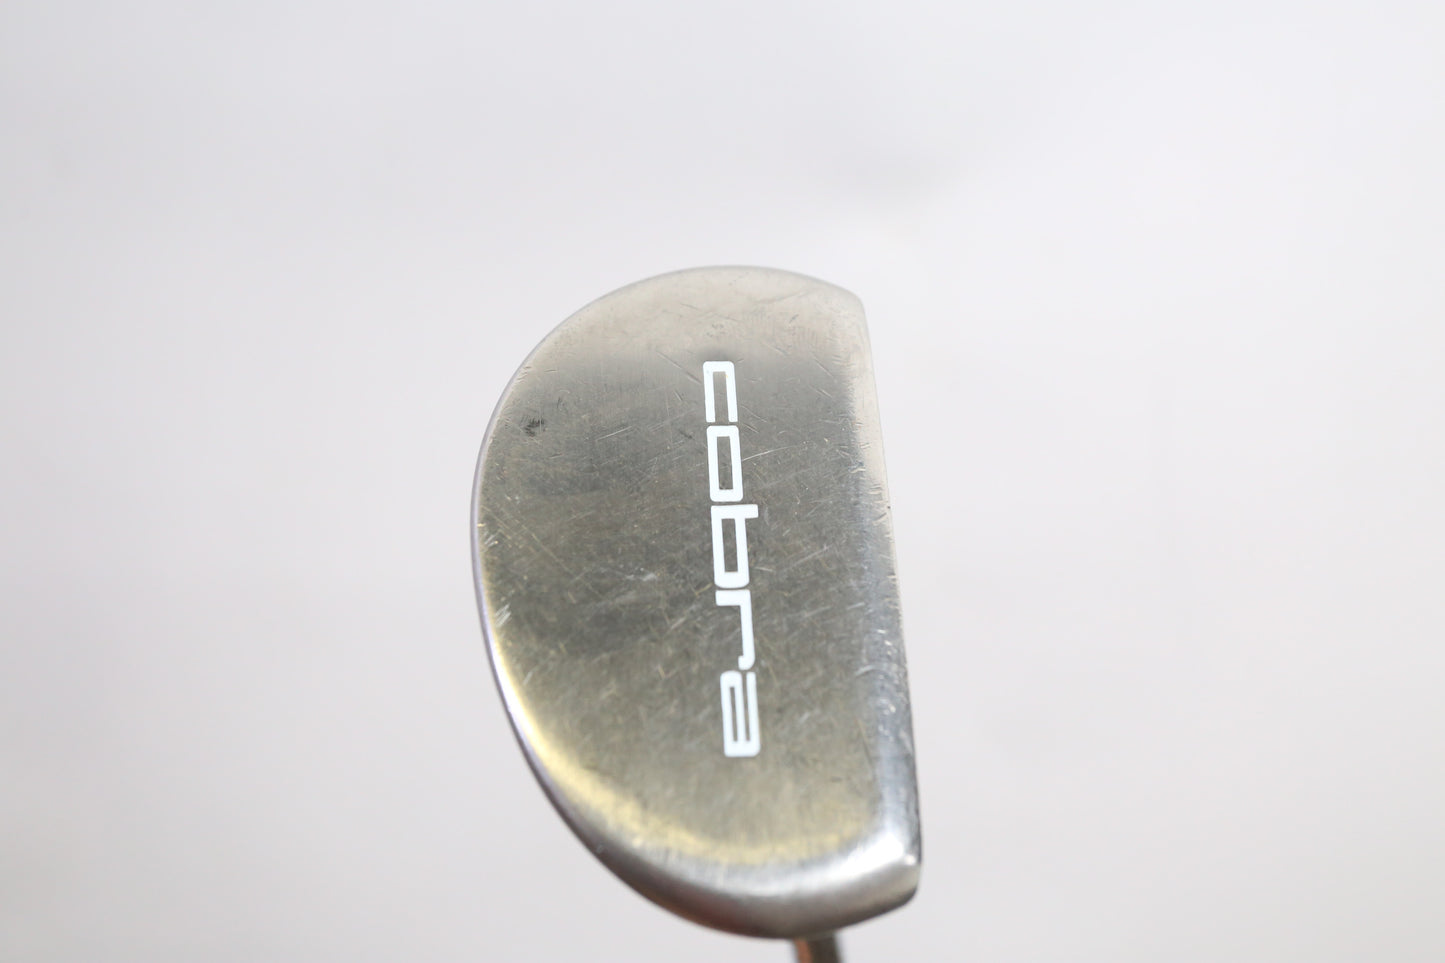 Used Cobra Mallet Putter - Right-Handed - 35 in - Mallet